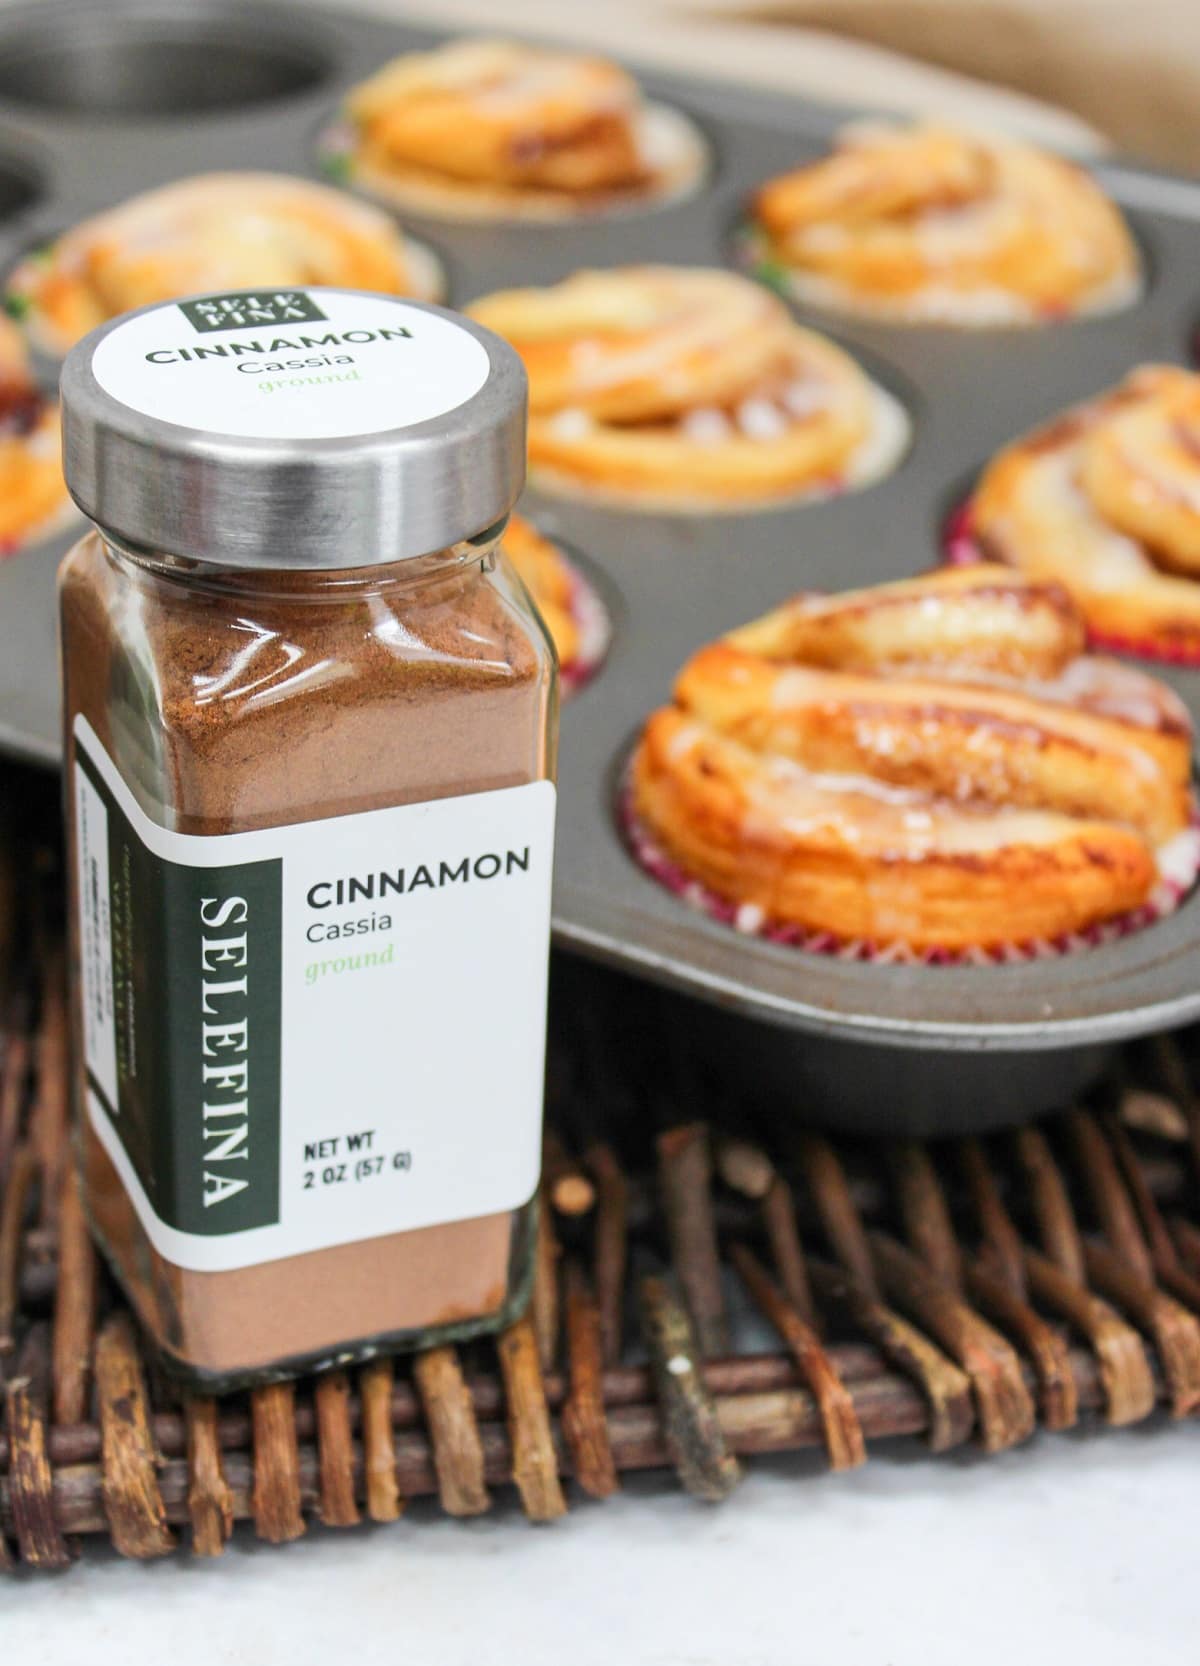 bottle of ground cinnamon next to a pan of baked muffins.